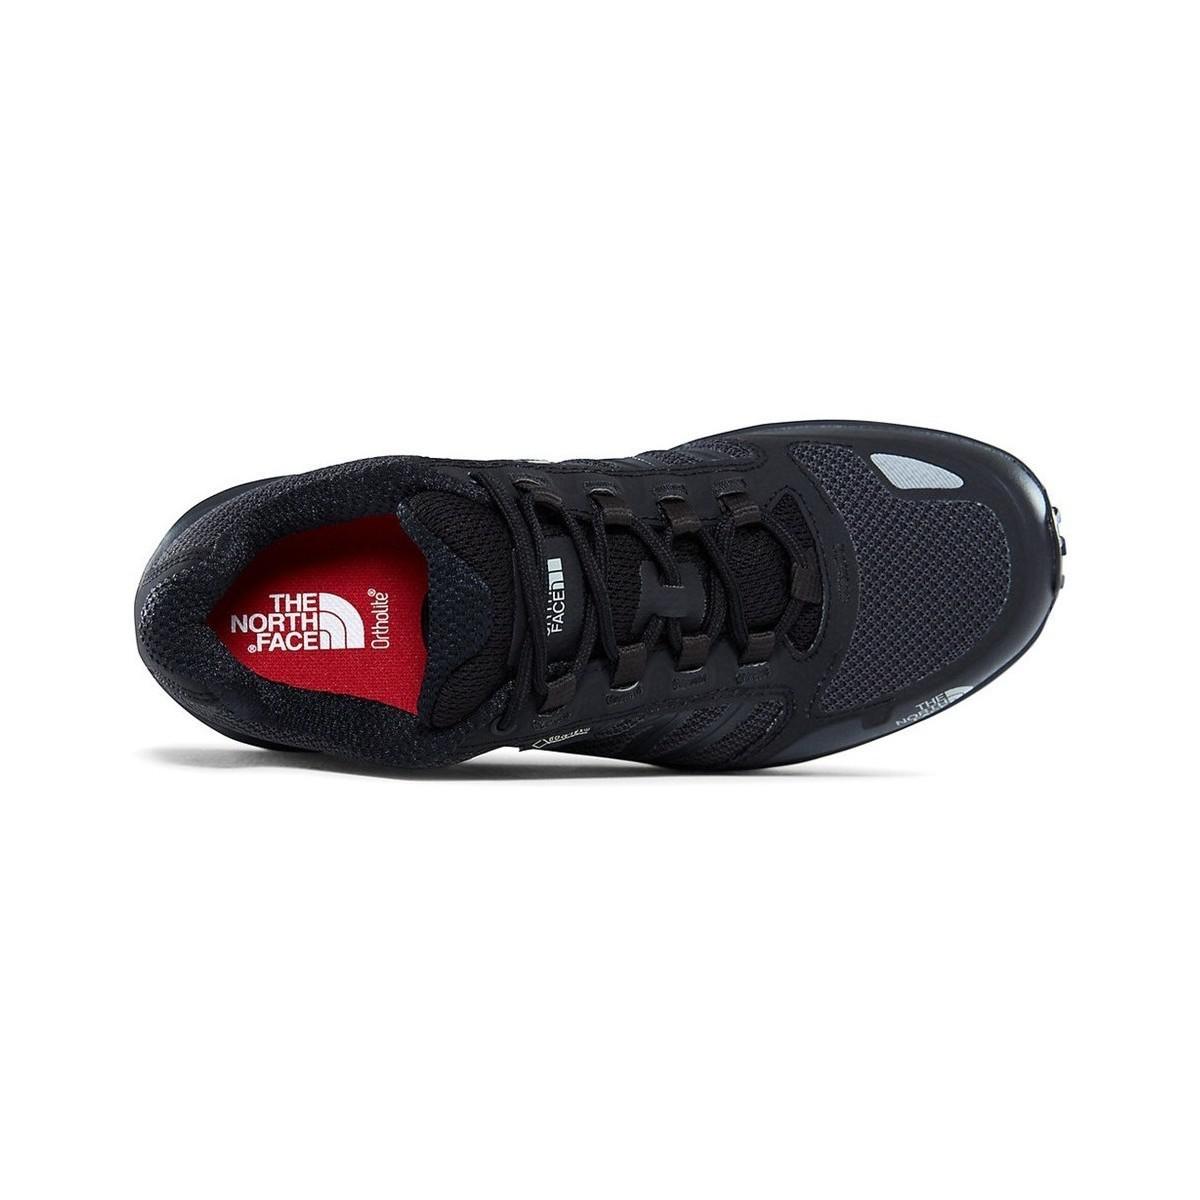 The North Face Litewave Fastpack Gtx Women S Hiking Shoes In Black Lyst